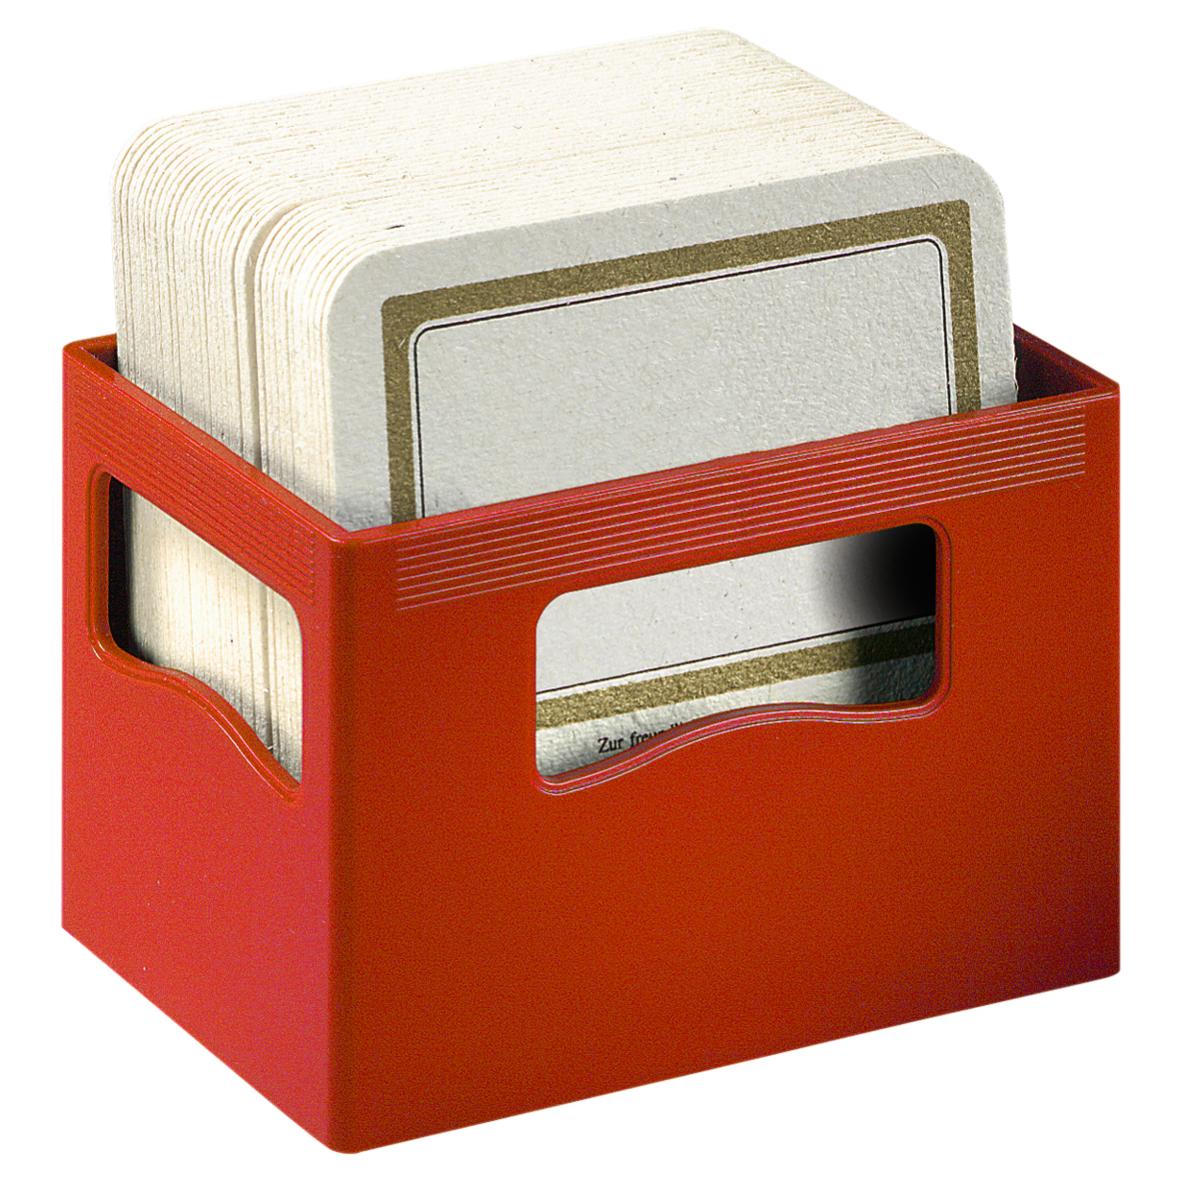 A novelty notelet box shaped like a beer crate that also serves as a beer mat stand. - Kenilworth